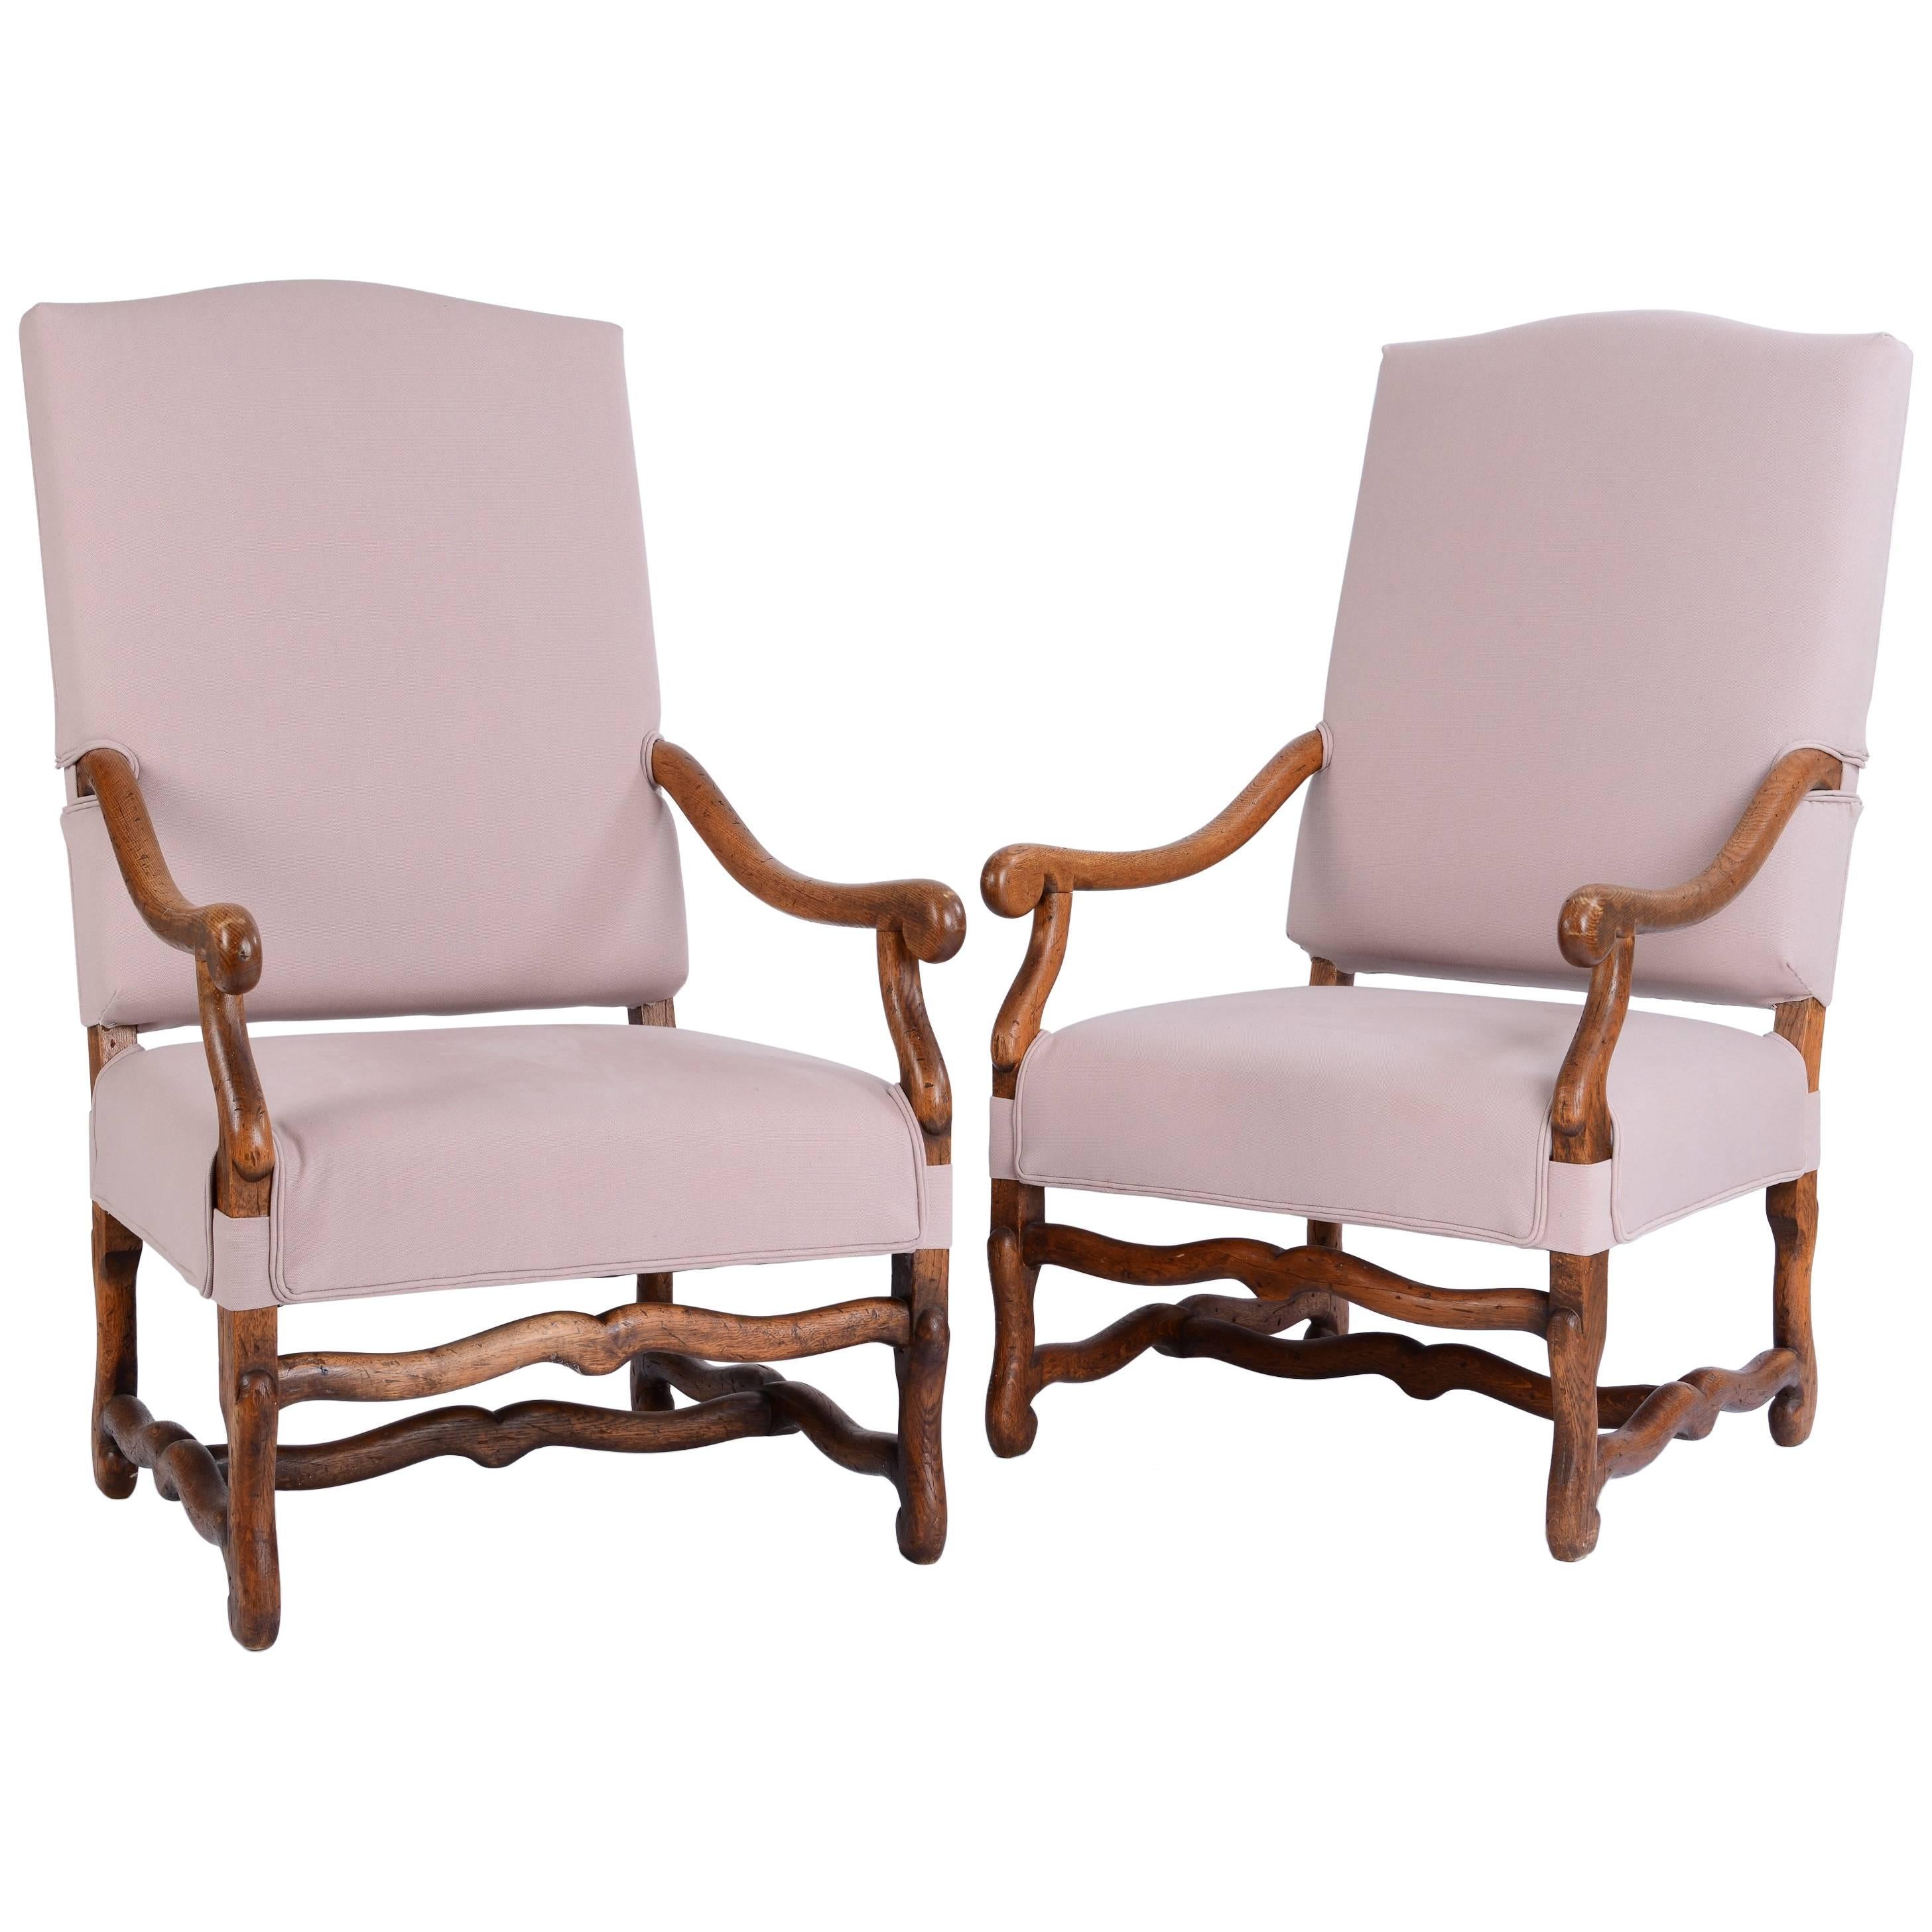 19th Century Pair of French Os de Mouton Armchairs